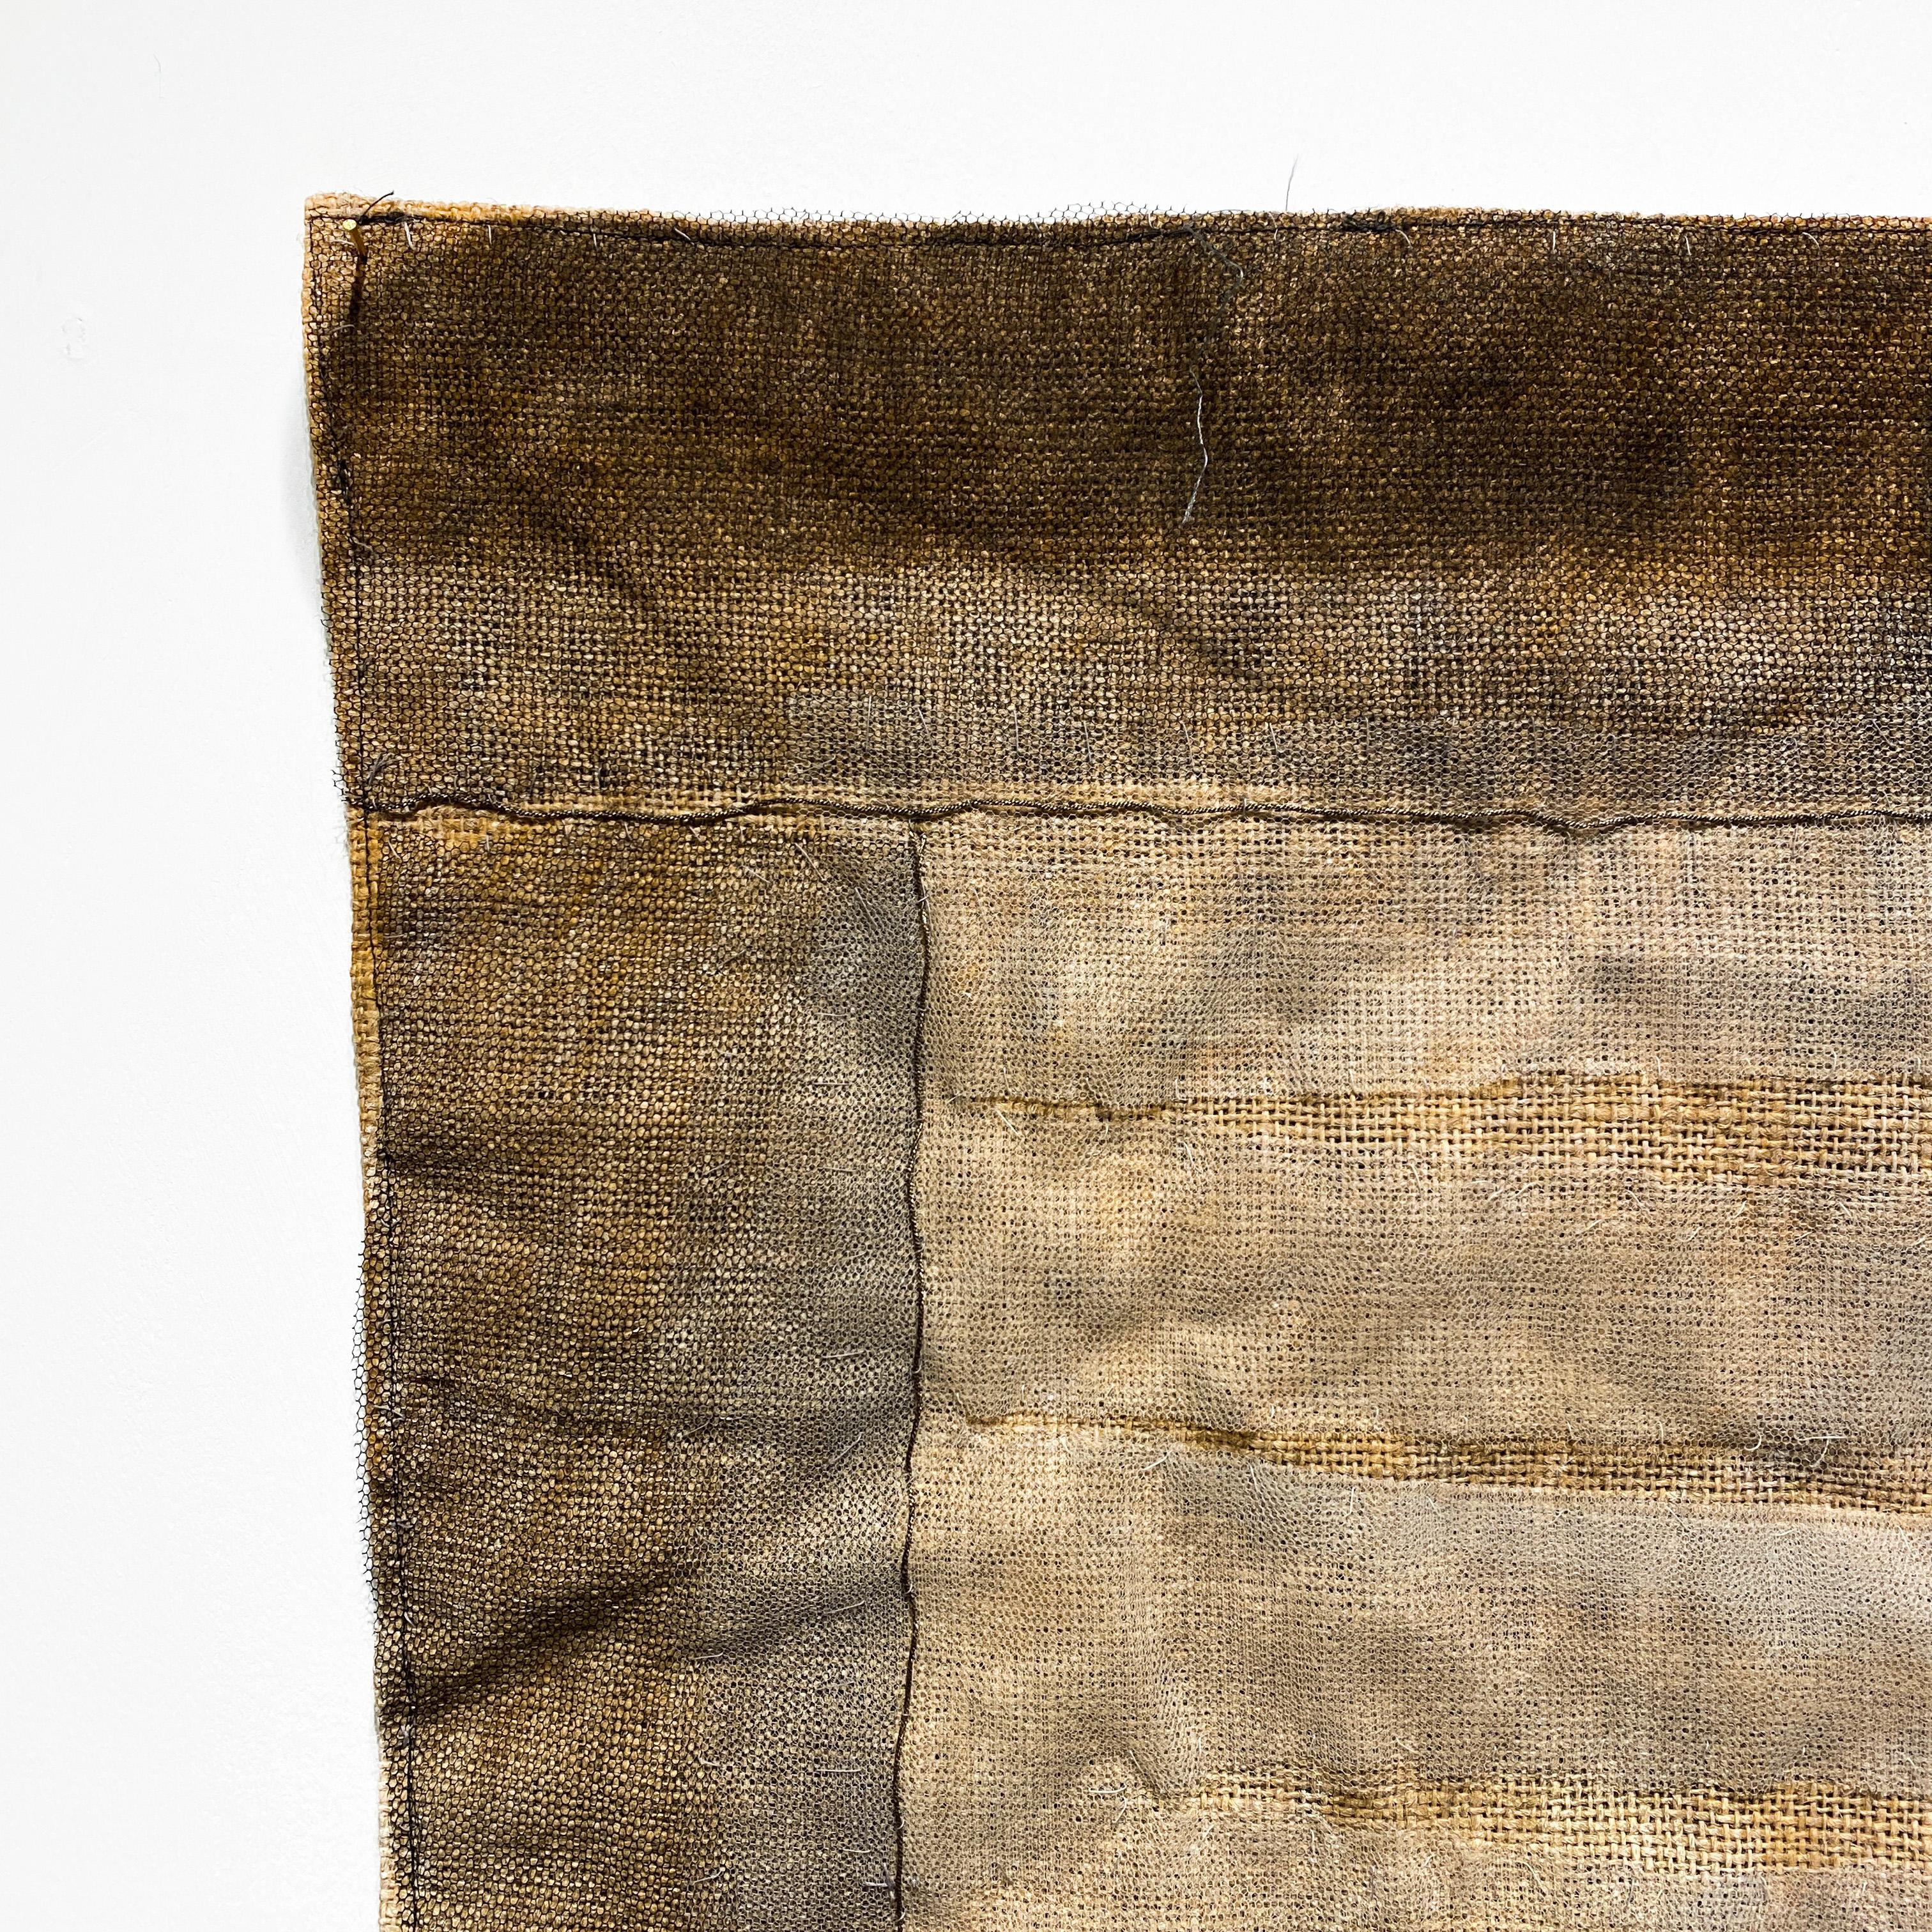 Brutalist Wall Textile in Earth Tones, Dutch 1960s, Signed & Dated For Sale 3